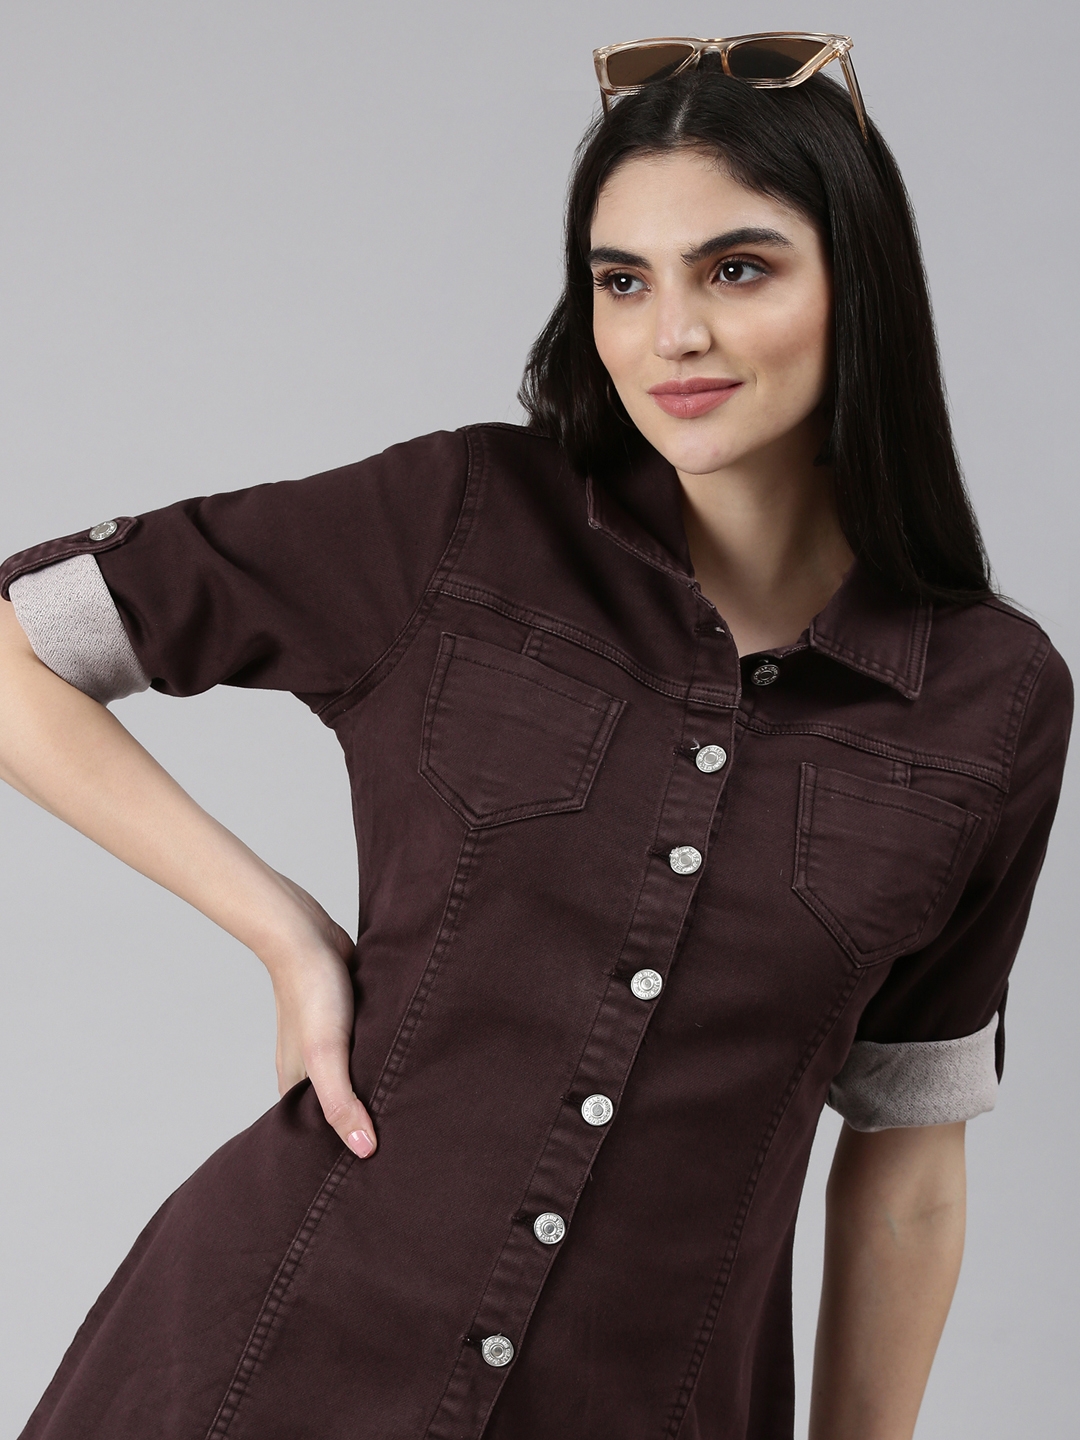 SHOWOFF Women's Shirt Collar Short Sleeves A-Line Solid Coffee Brown Mini Dress